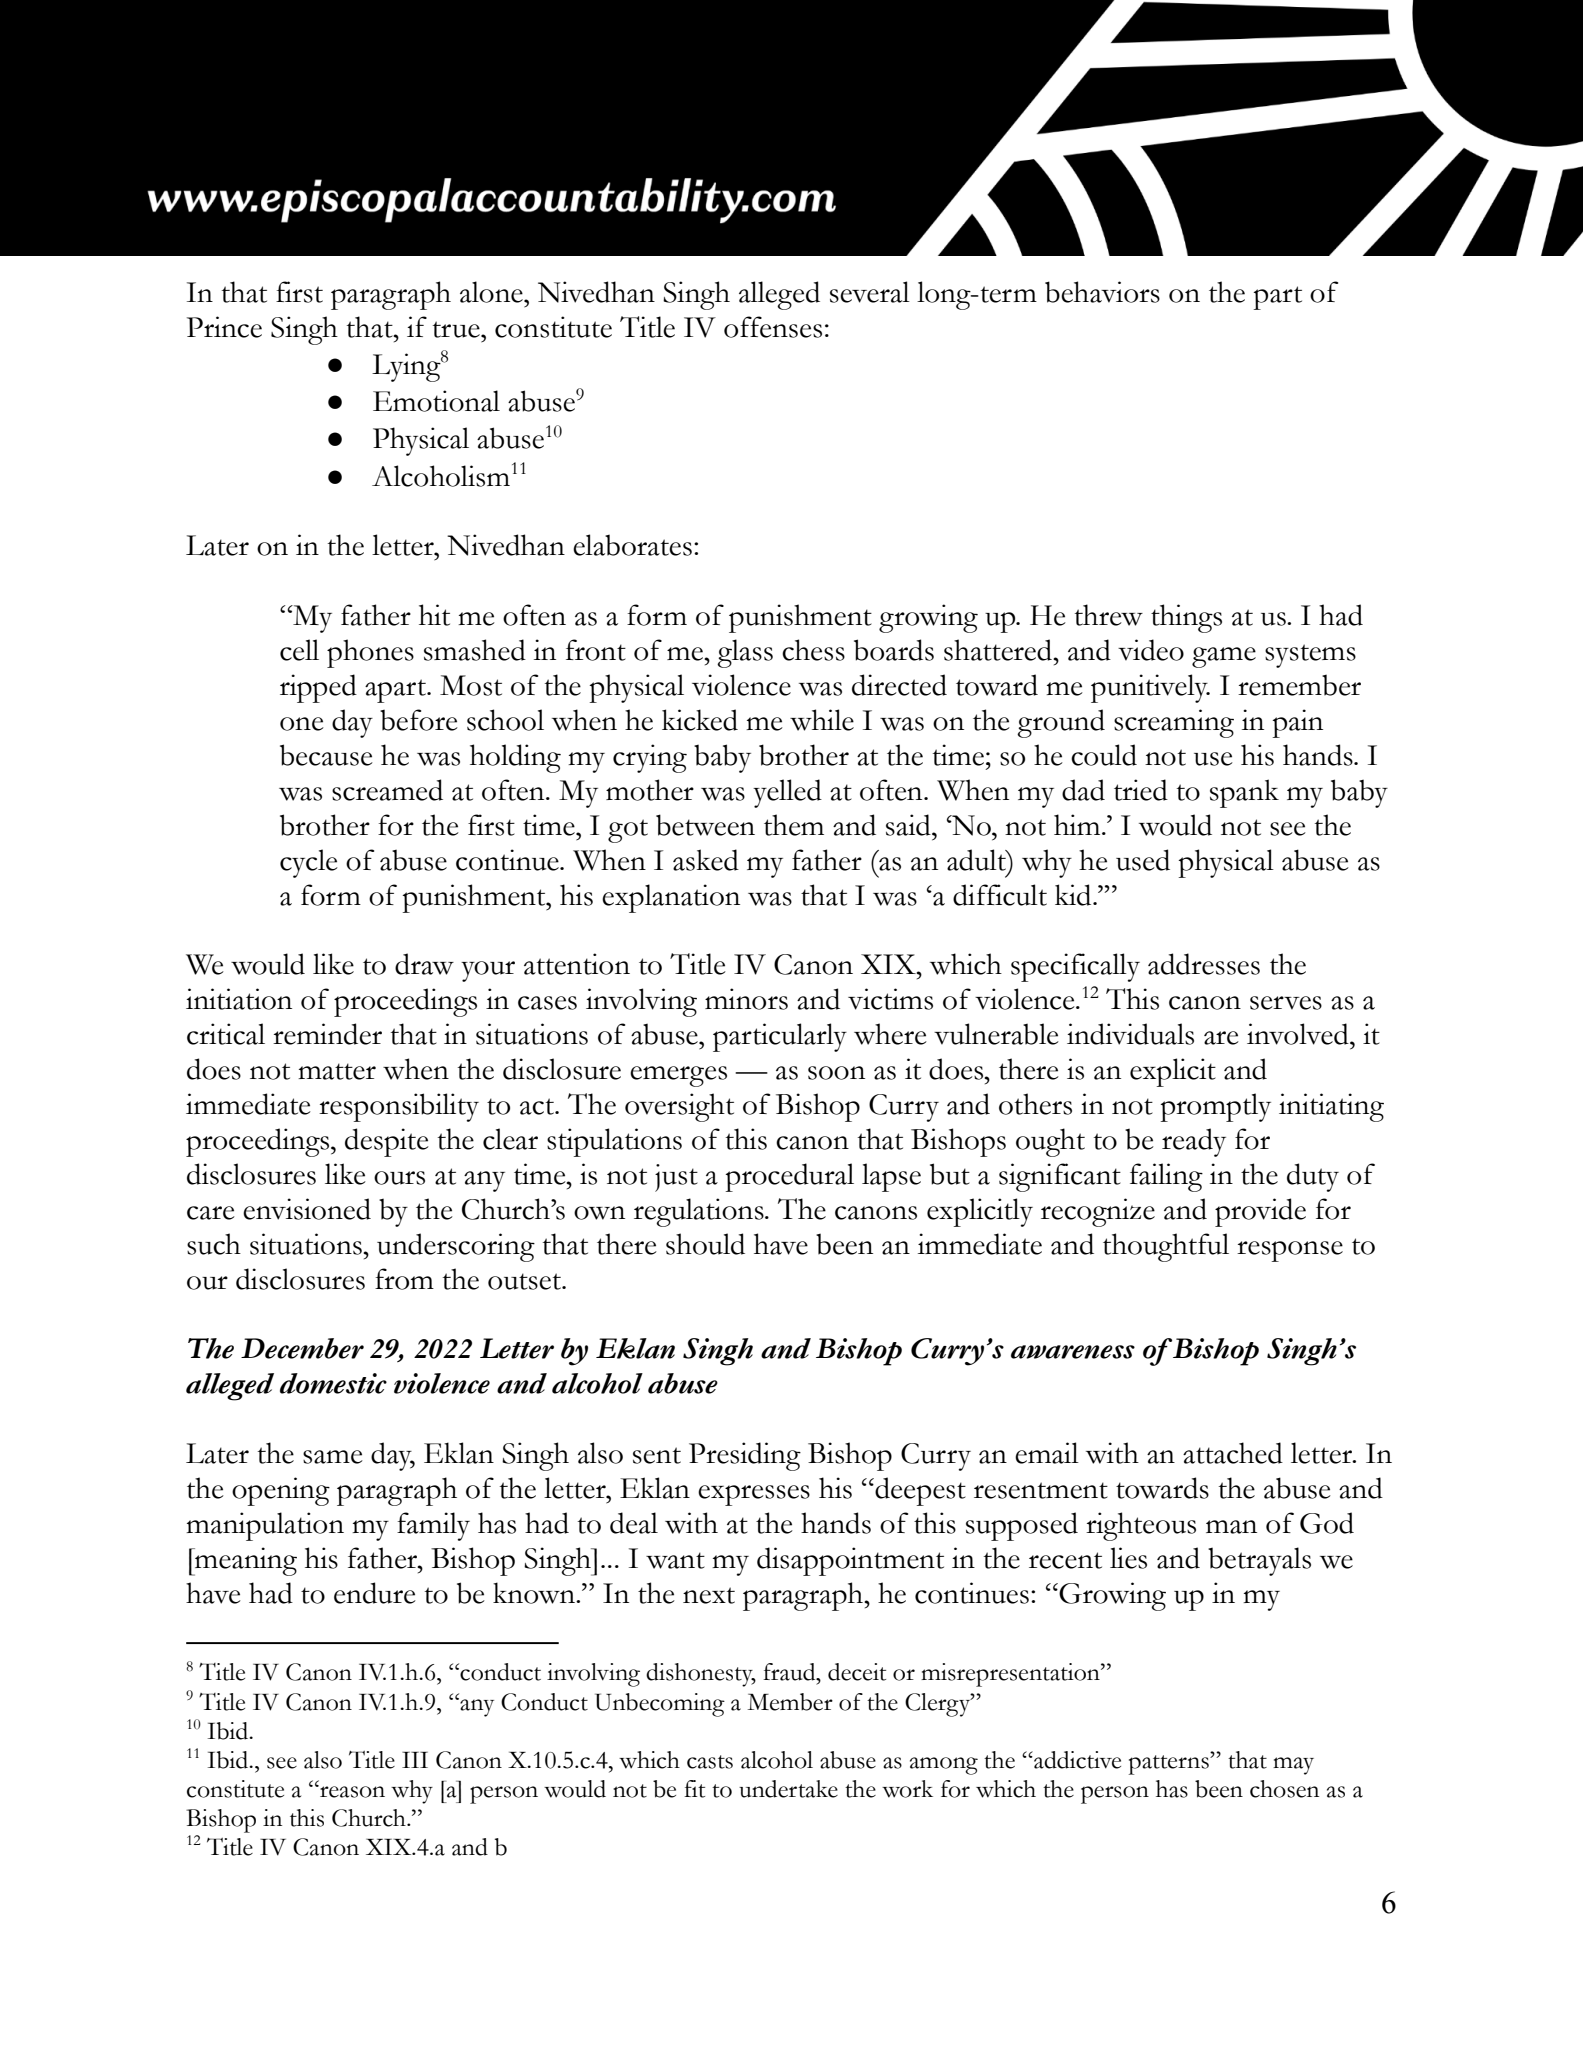 Investigation request letter - Page 6